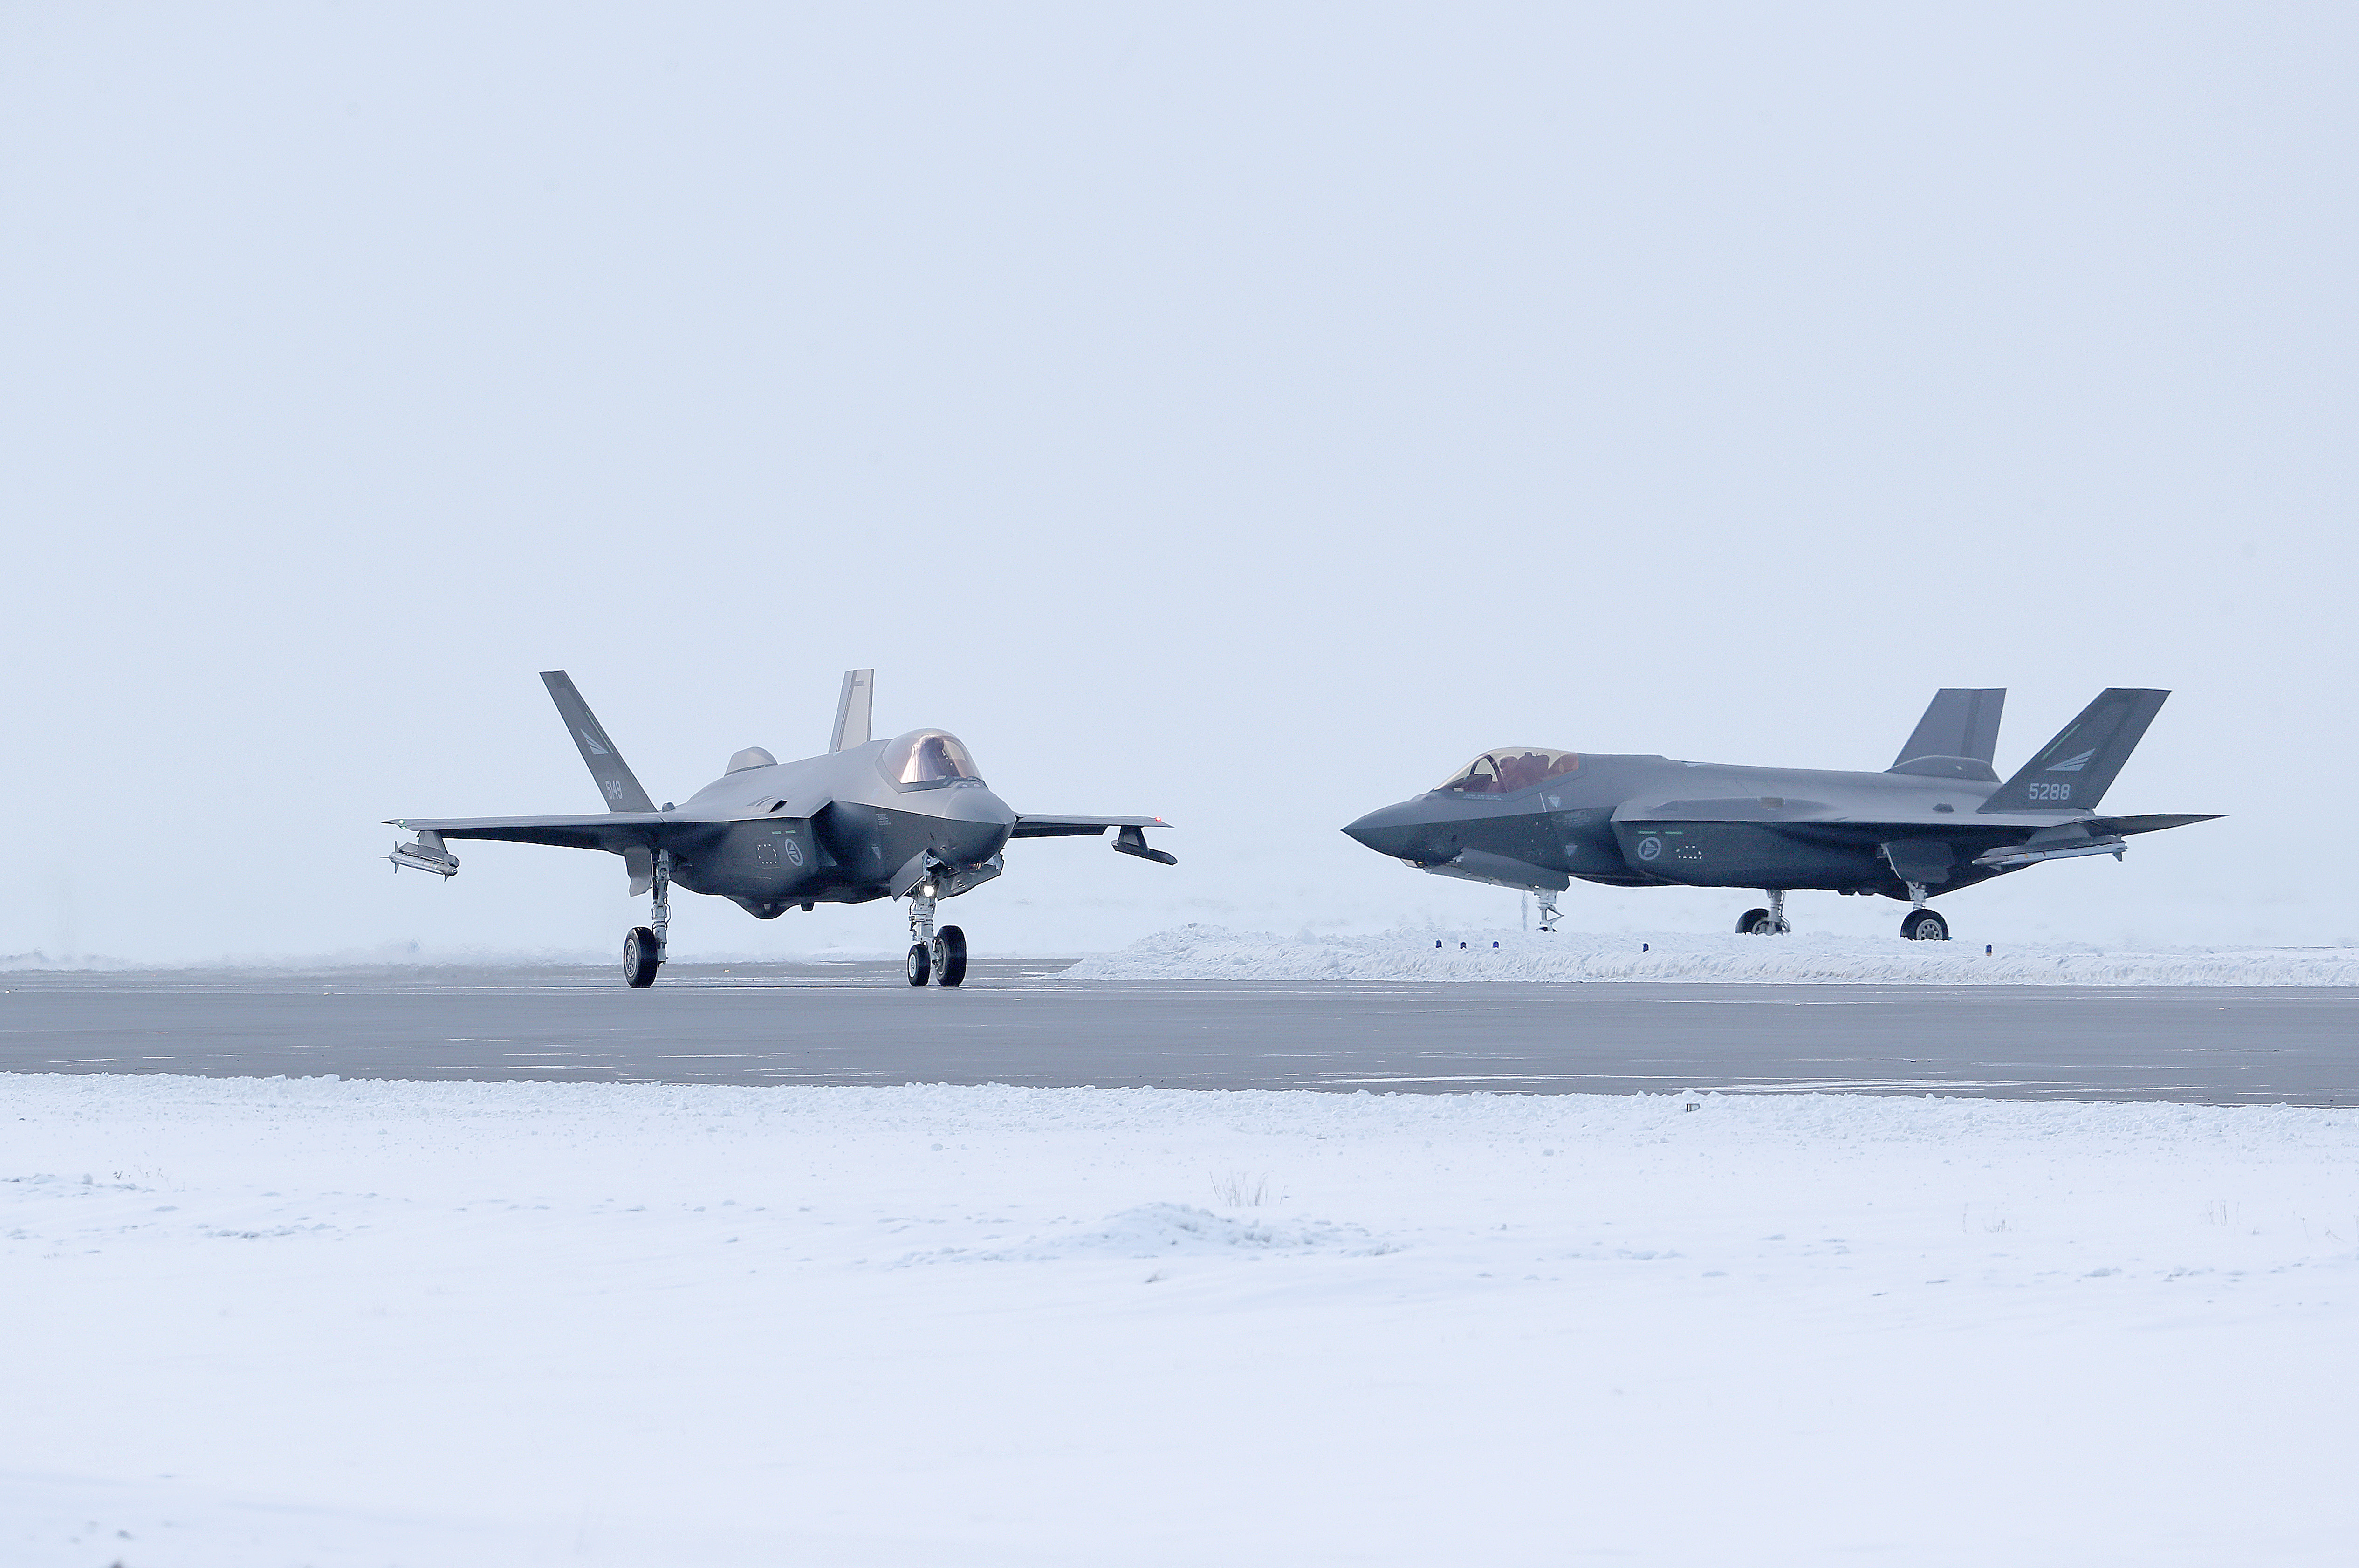 Norway S New F 35 Scrambled For First Time To Meet Russian Anti Sub Aircraft The Independent Barents Observer